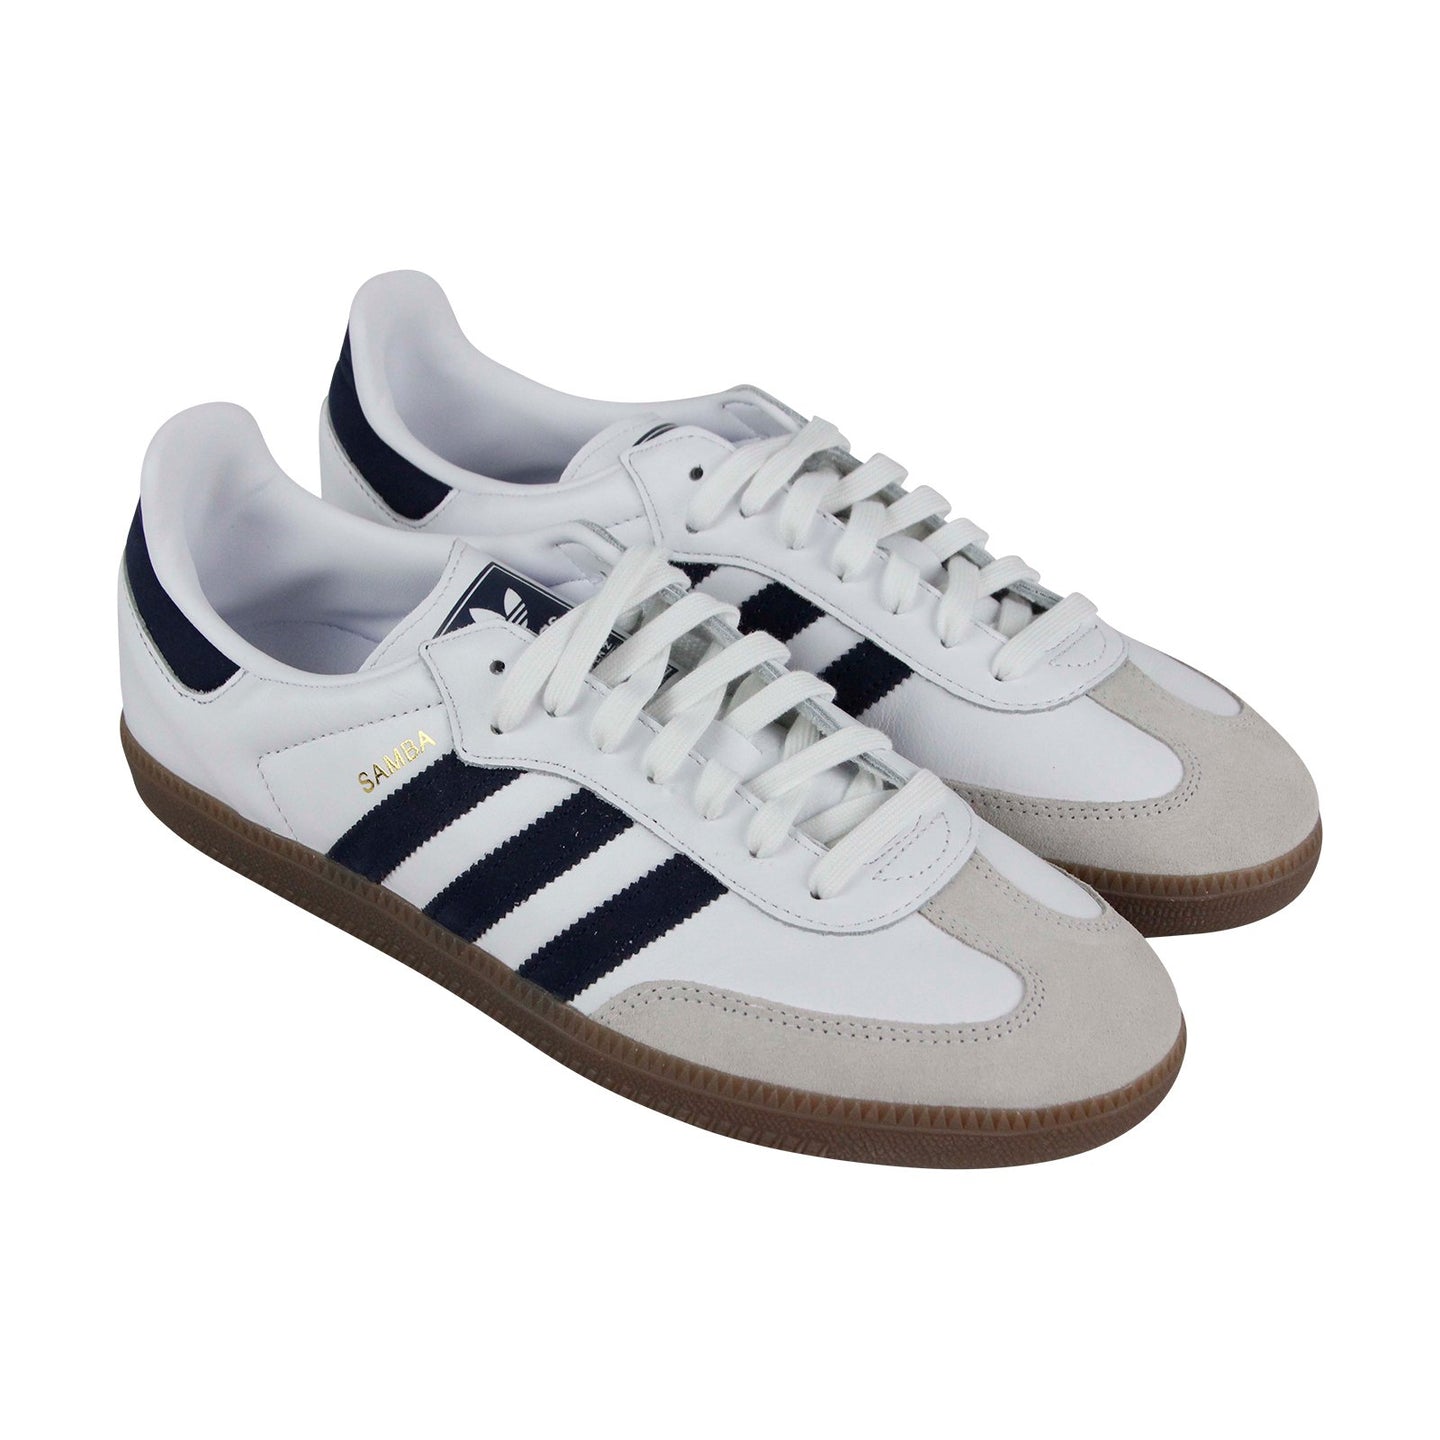 Adidas Samba OG B75681 Mens White Leather Low Top Lifestyle Sneakers S ...